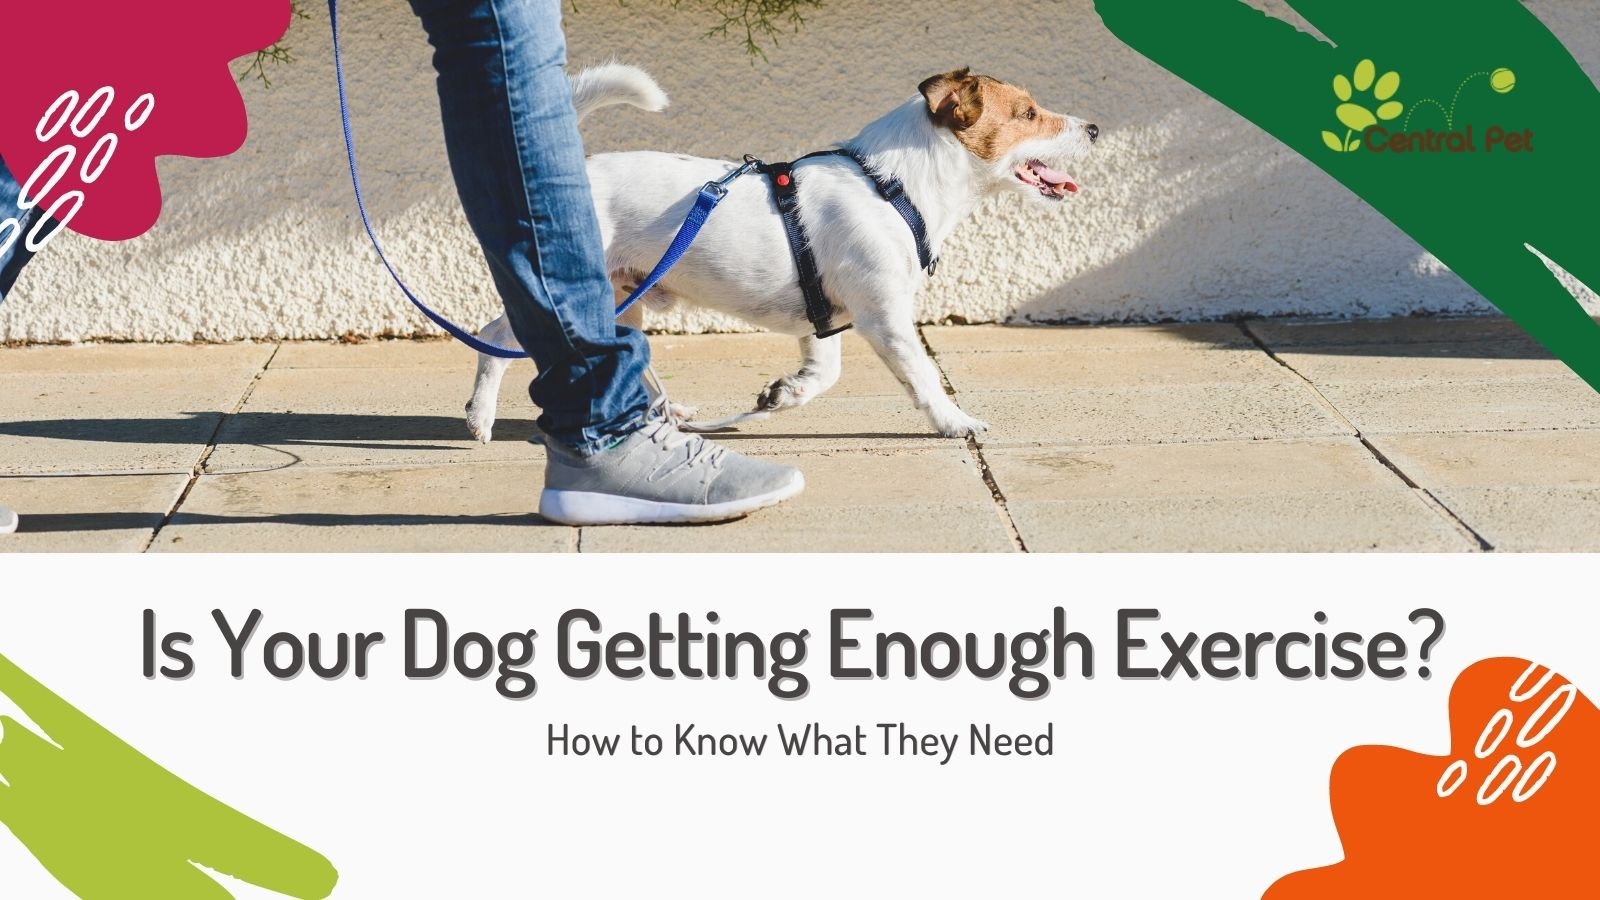 Is Your Dog Getting Enough Exercise? How to Know What They Need